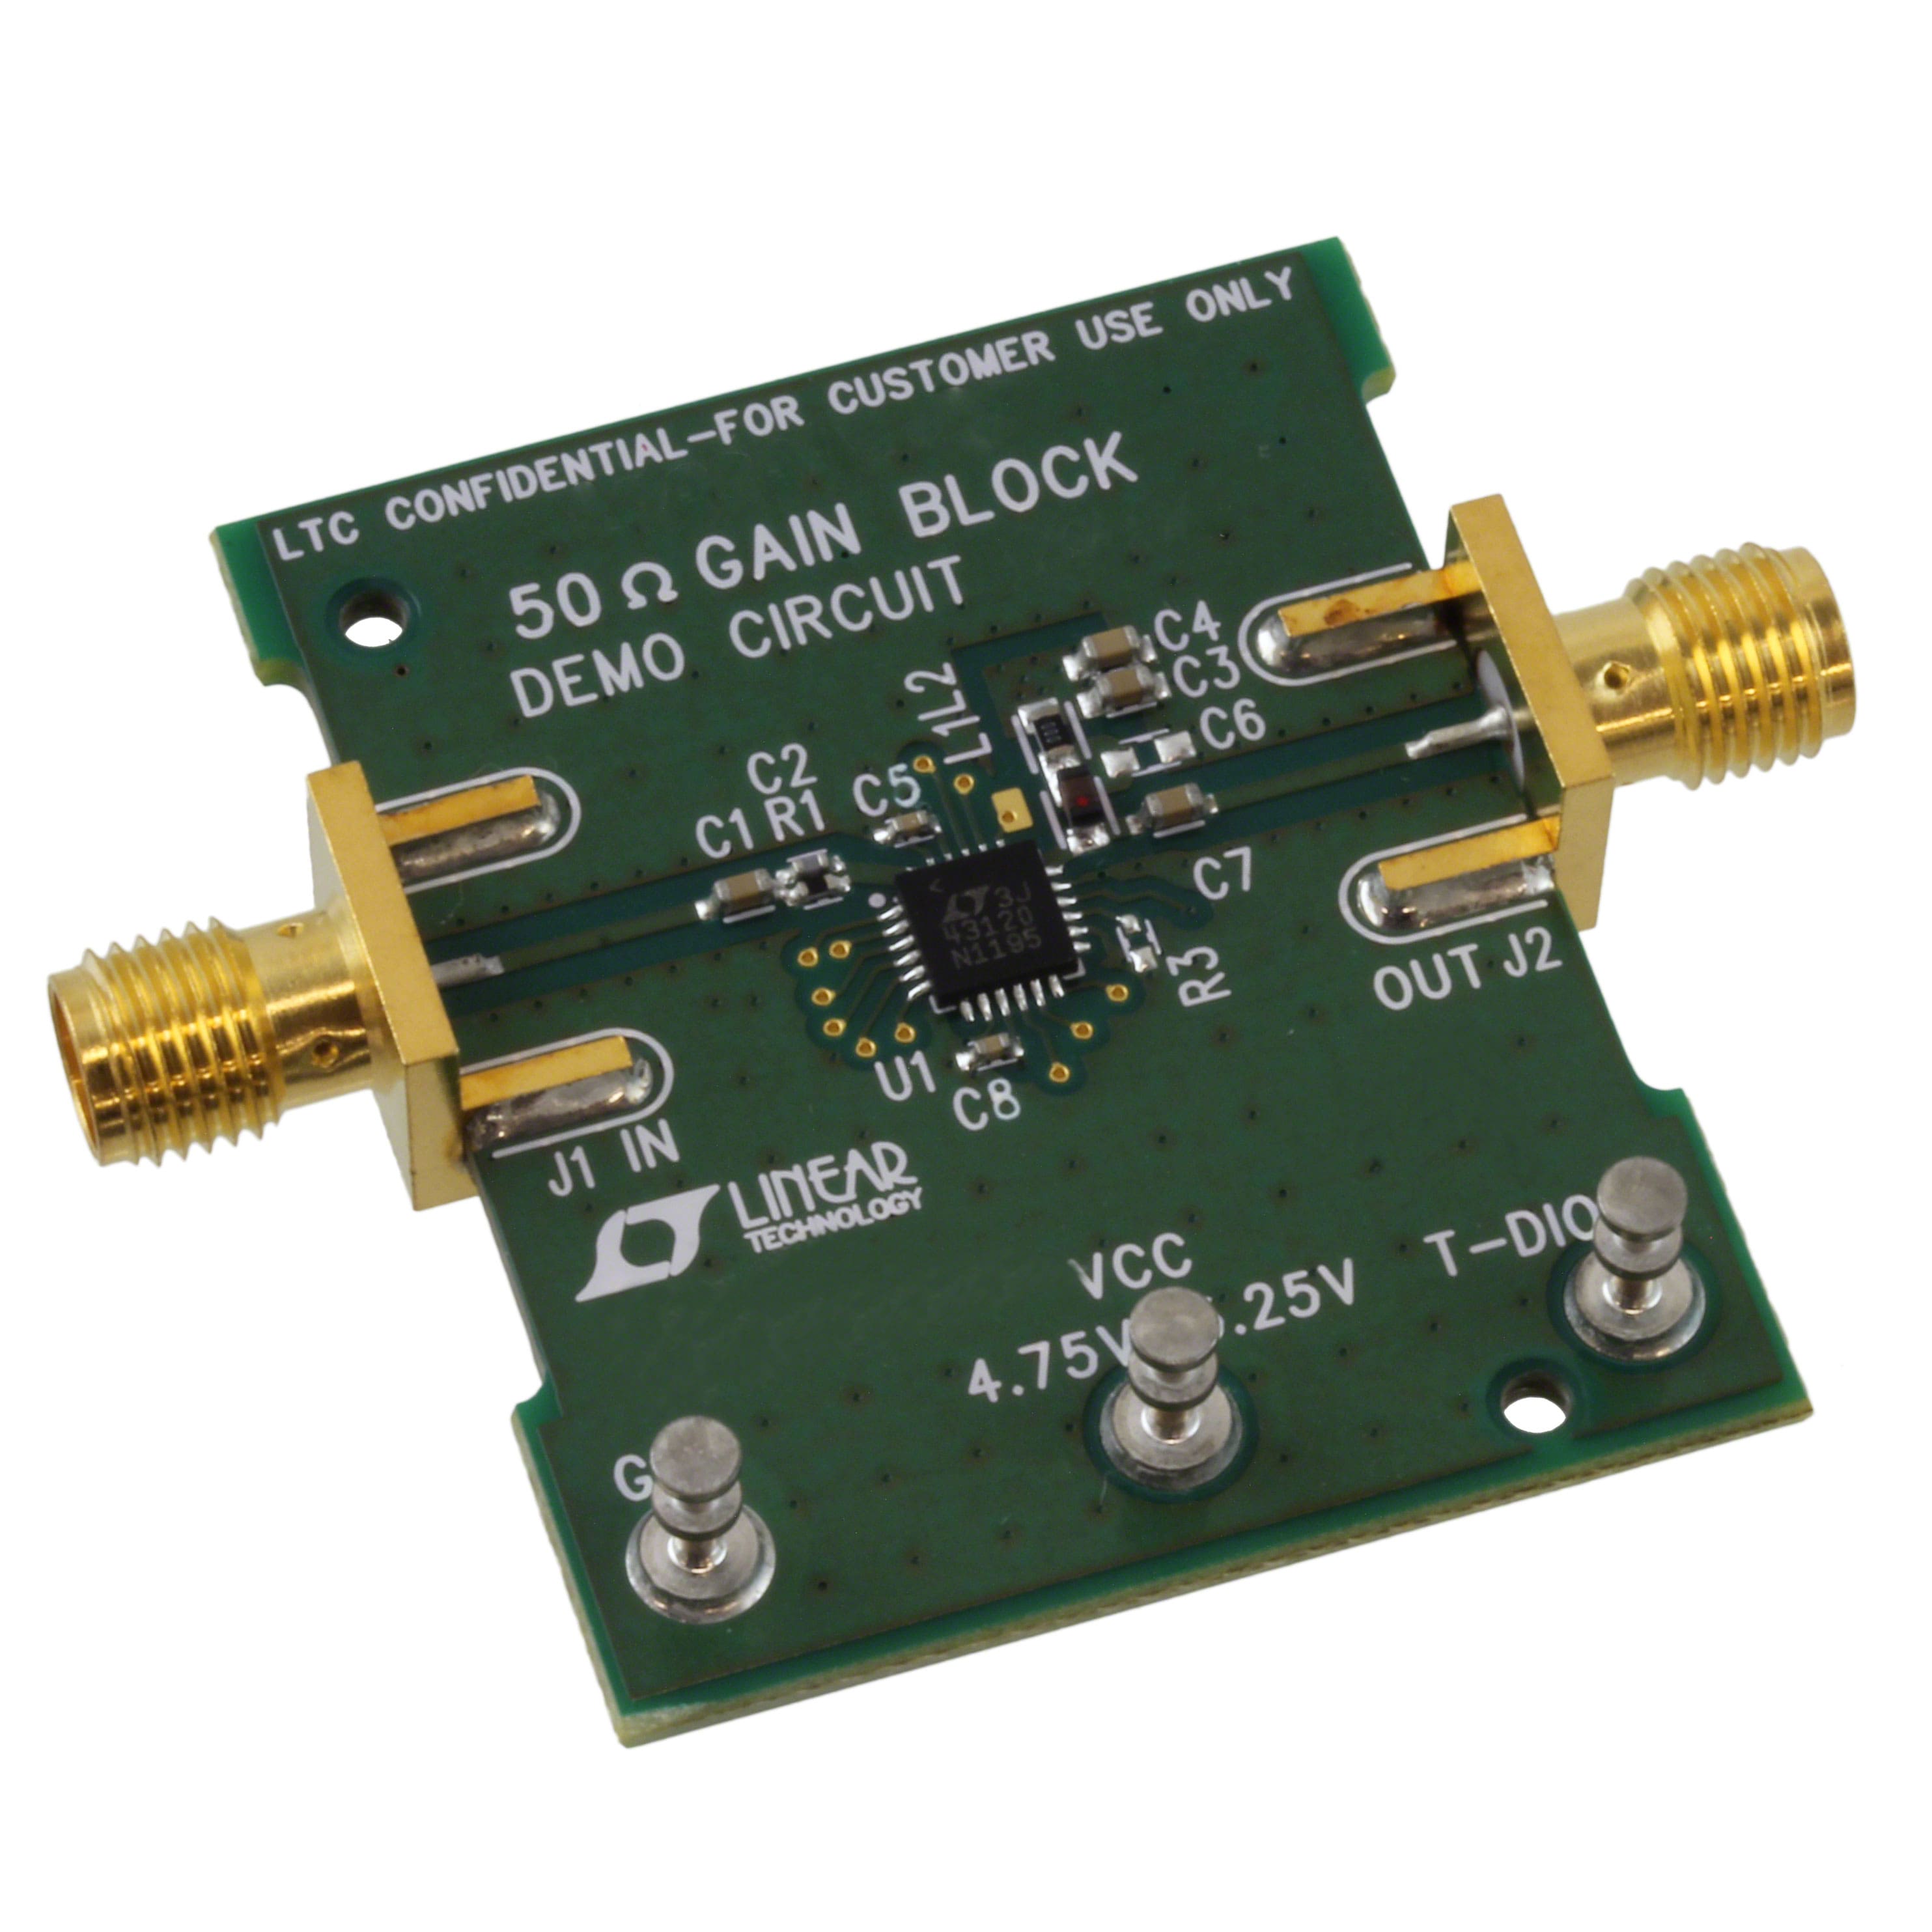 Analog Devices Inc. DC2077A